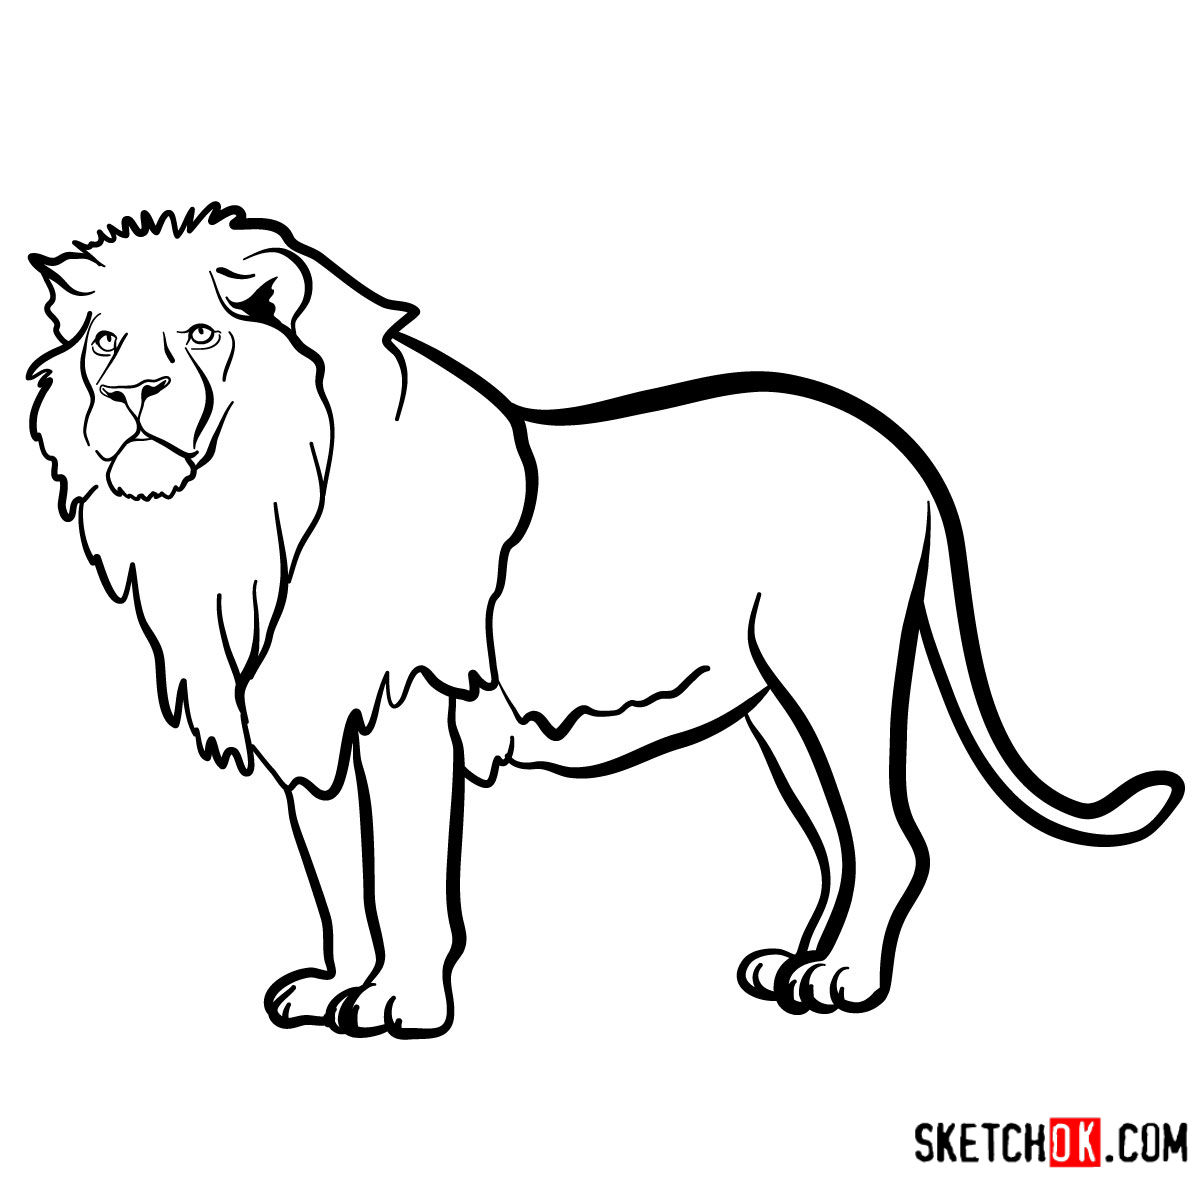 How To Draw a Lion - Step By Step - Cool Drawing Idea-saigonsouth.com.vn